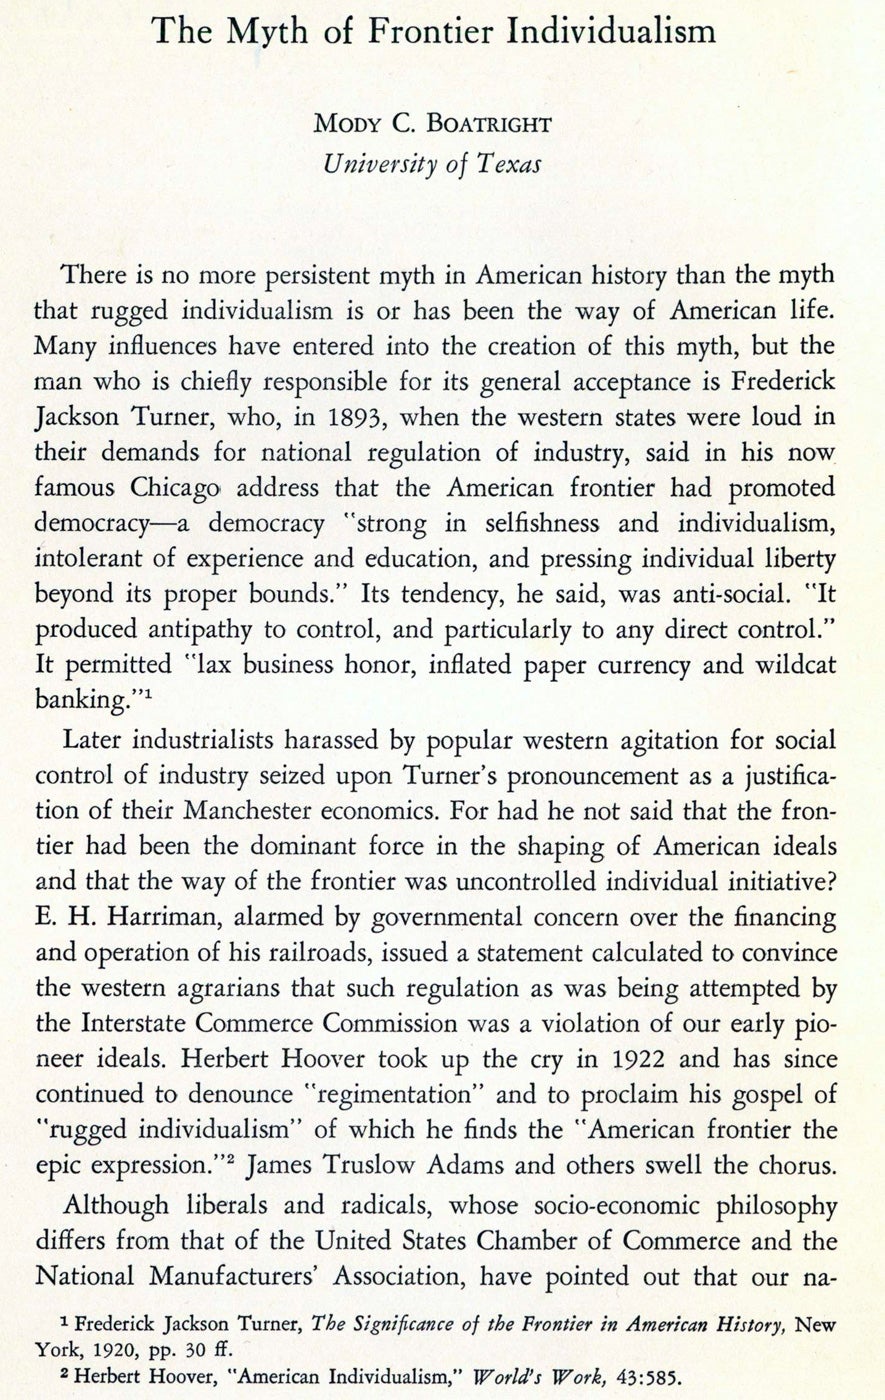 Boatright, Mody C. - The Myth of Frontier Individualism. Reprinted from the Southwestern Social Science Quarterly, Vol. XXII, No. 1, June 1941